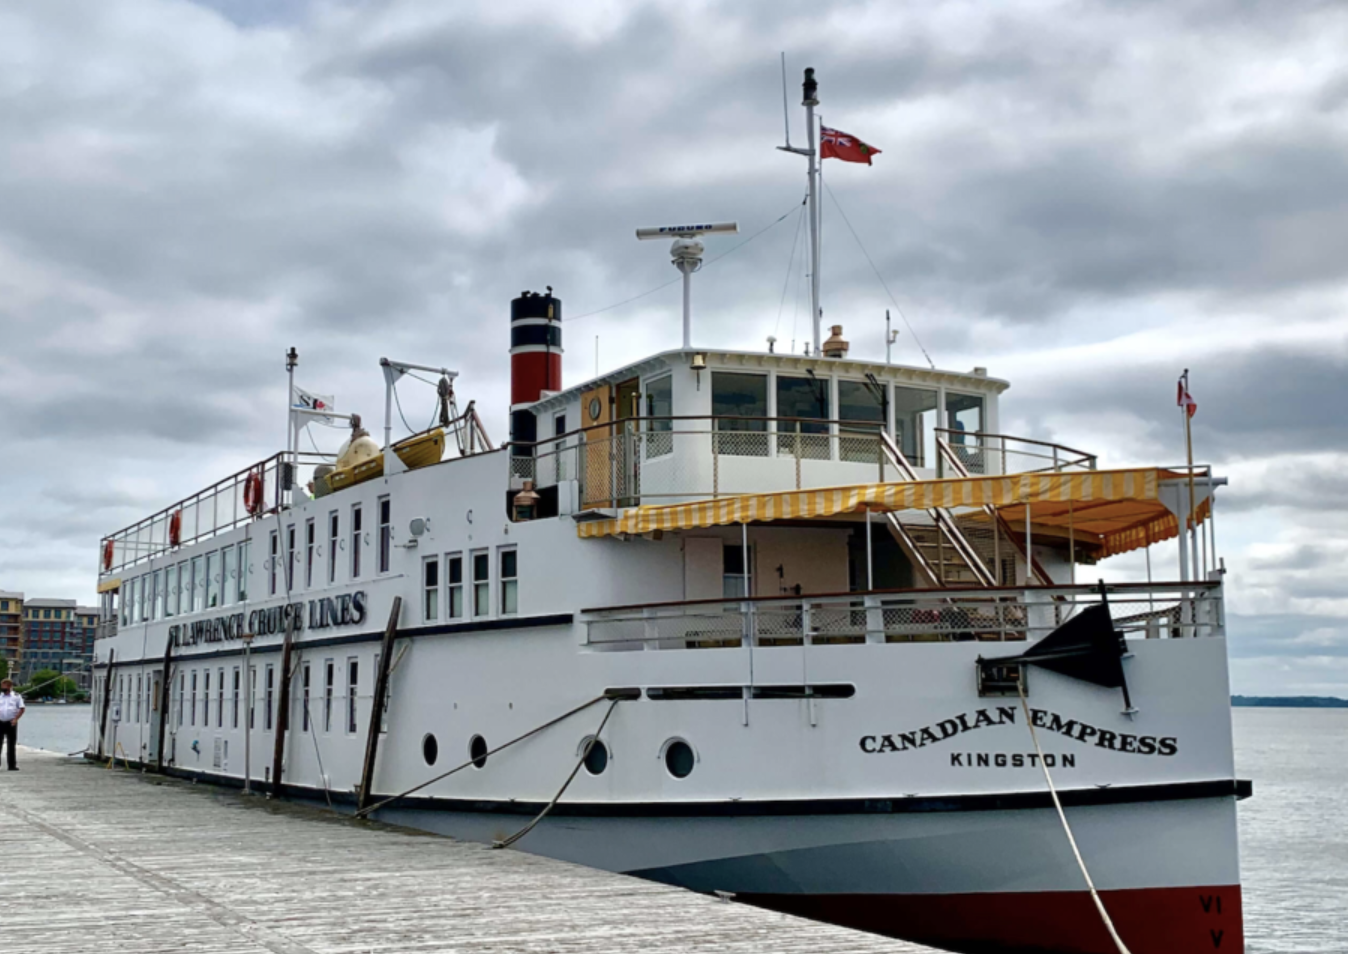 The Canadian Empress St. Lawrence Cruise